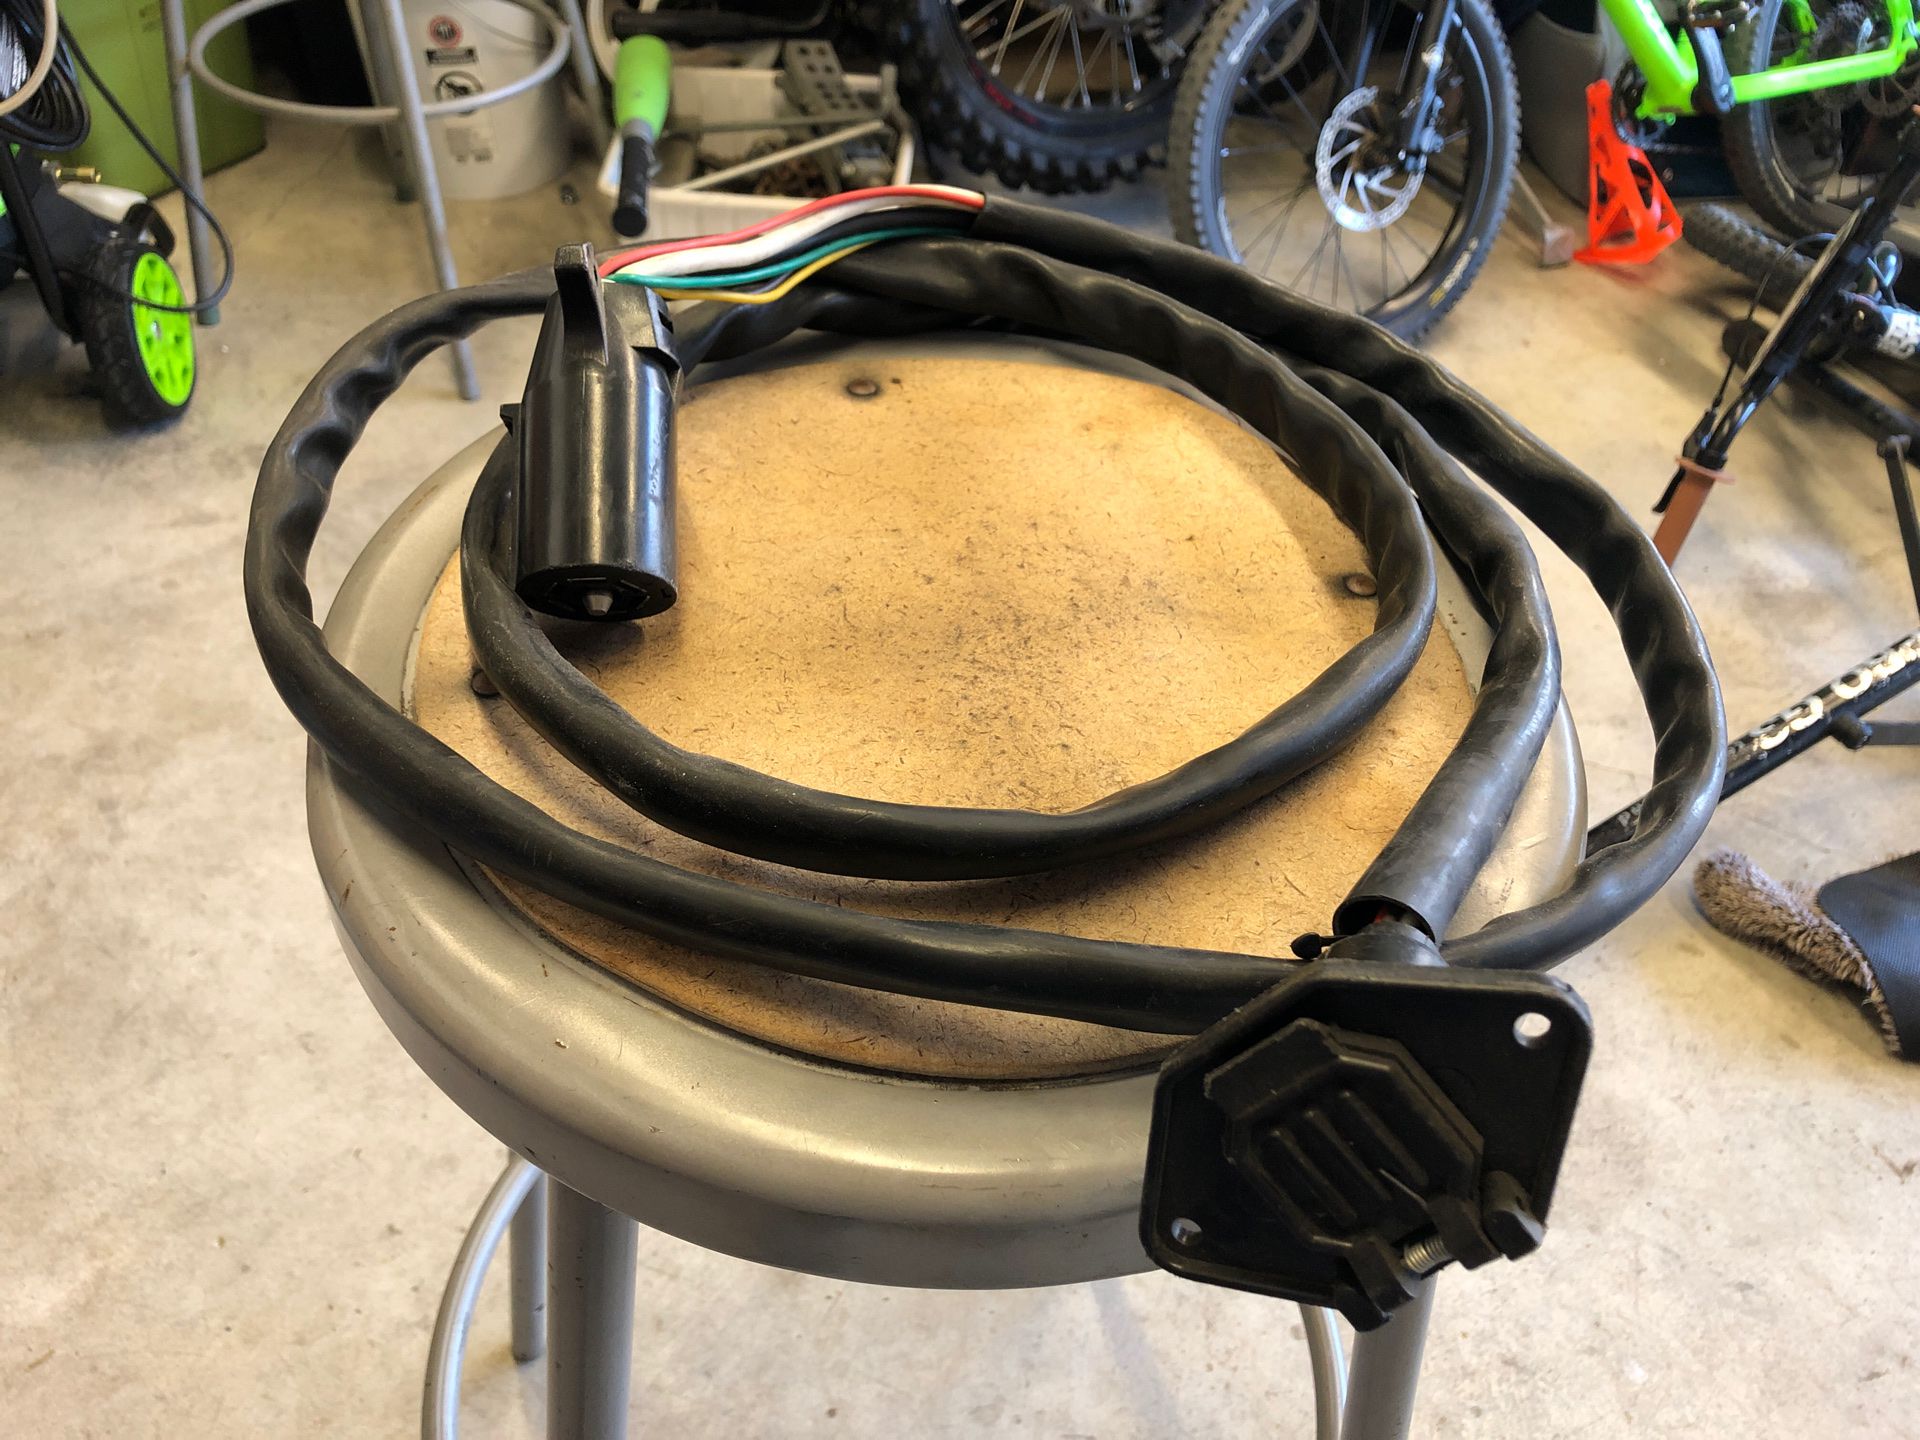 Camper trailer wire harness extension